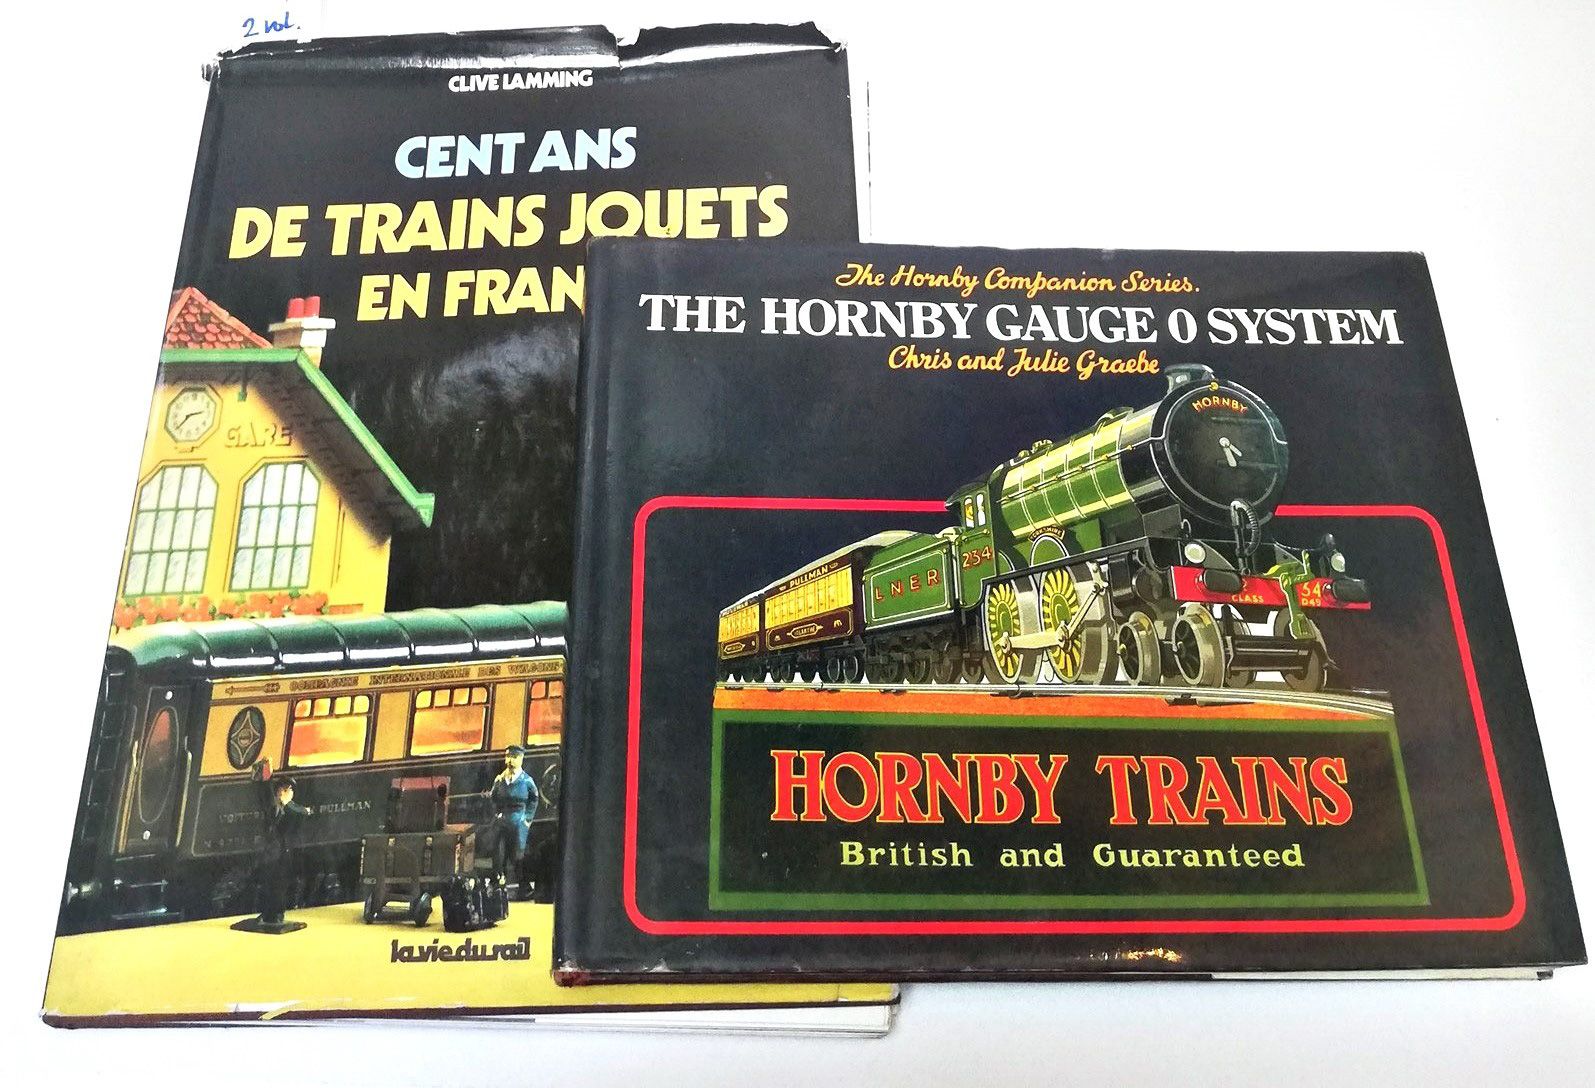 Null Set of 2 volumes:

- Chris and Julie Graebe "The Hornby Gauge o system / Th&hellip;